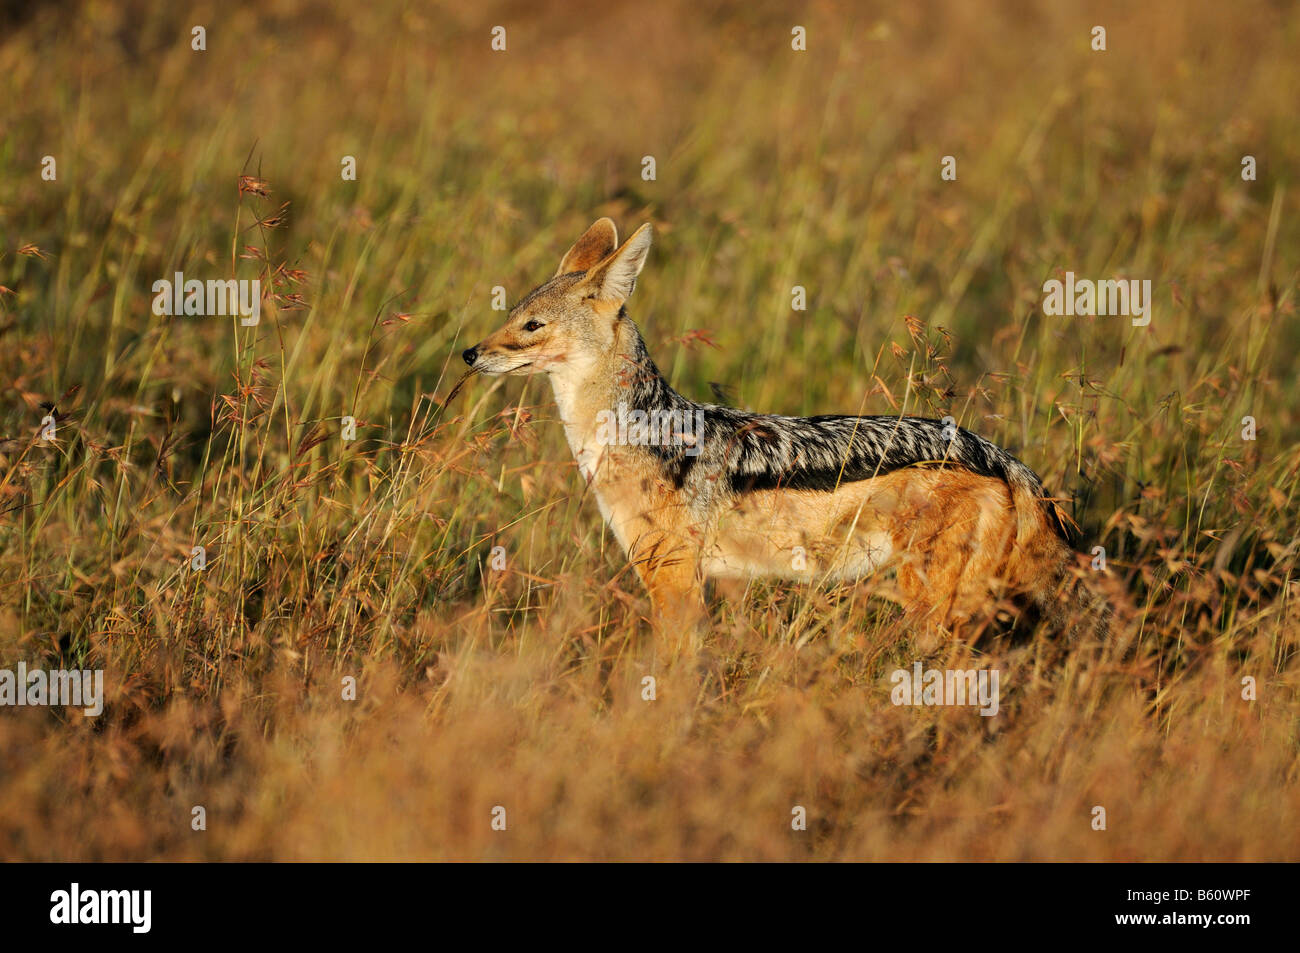 Nero-backed Jackal (Canis mesomelas) nel giorno della prima luce, Sweetwater Game Reserve, Kenya, Africa orientale, Africa Foto Stock